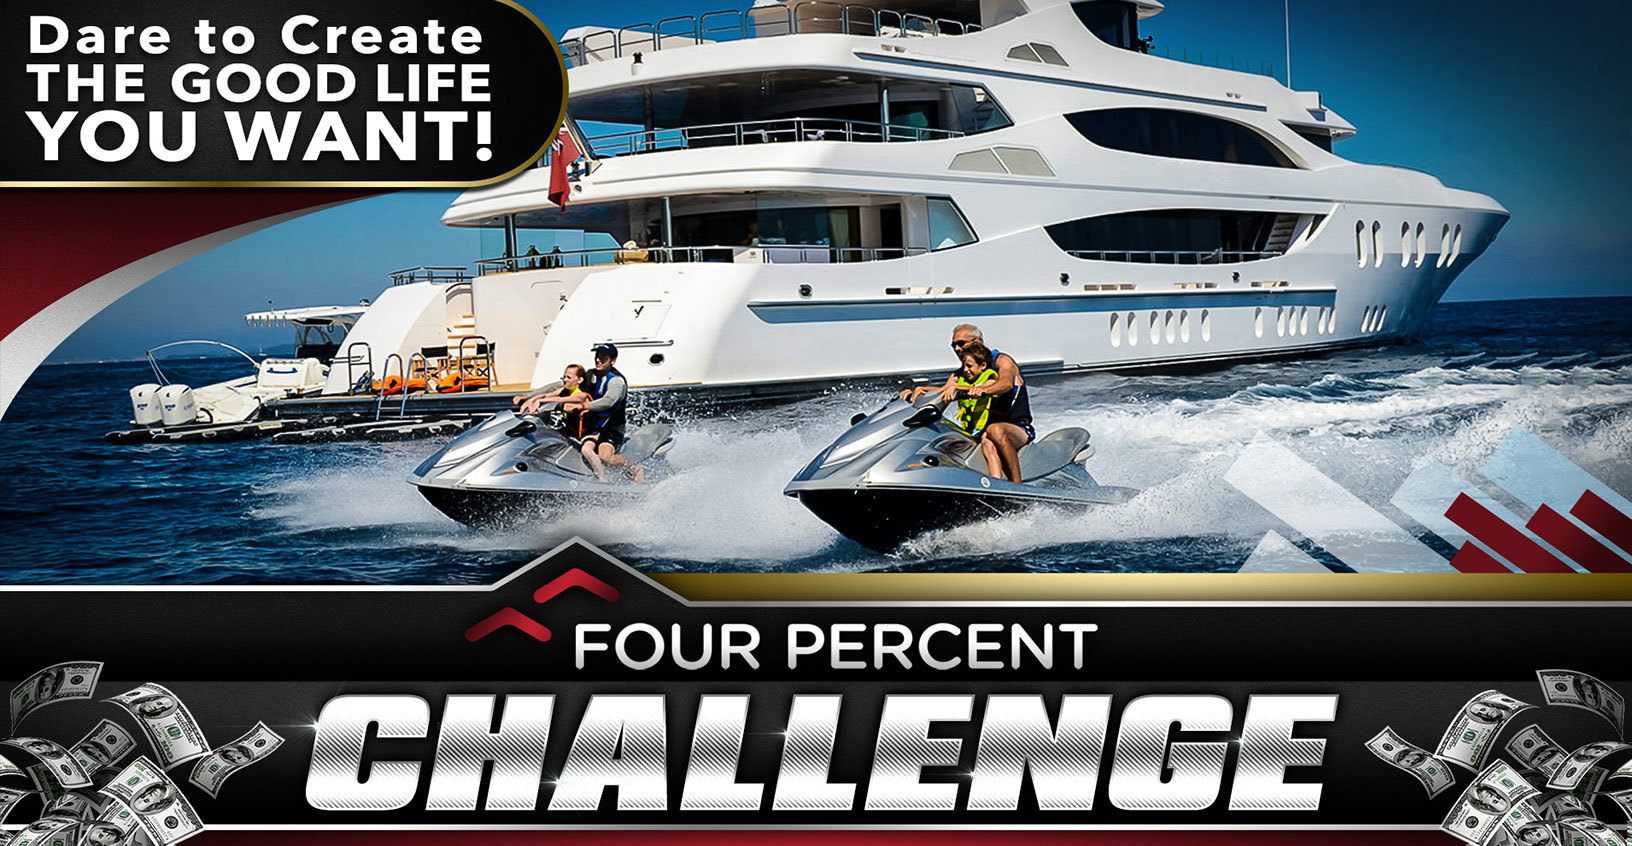 Want to see how to build a successful business from scratch check out the Four Percent Challenge